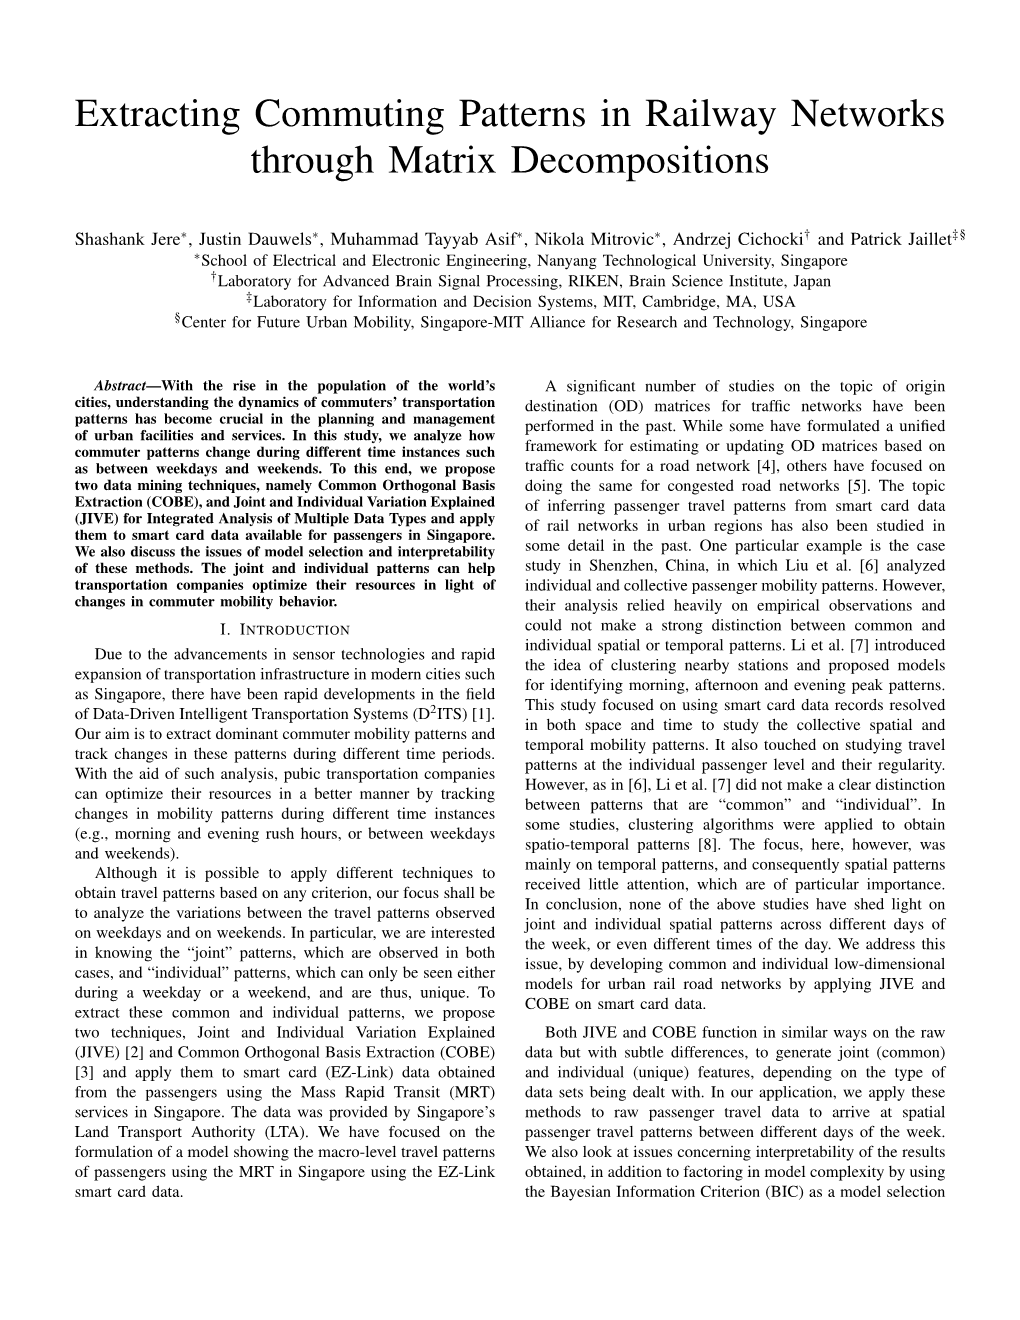 Extracting Commuting Patterns in Railway Networks Through Matrix Decompositions